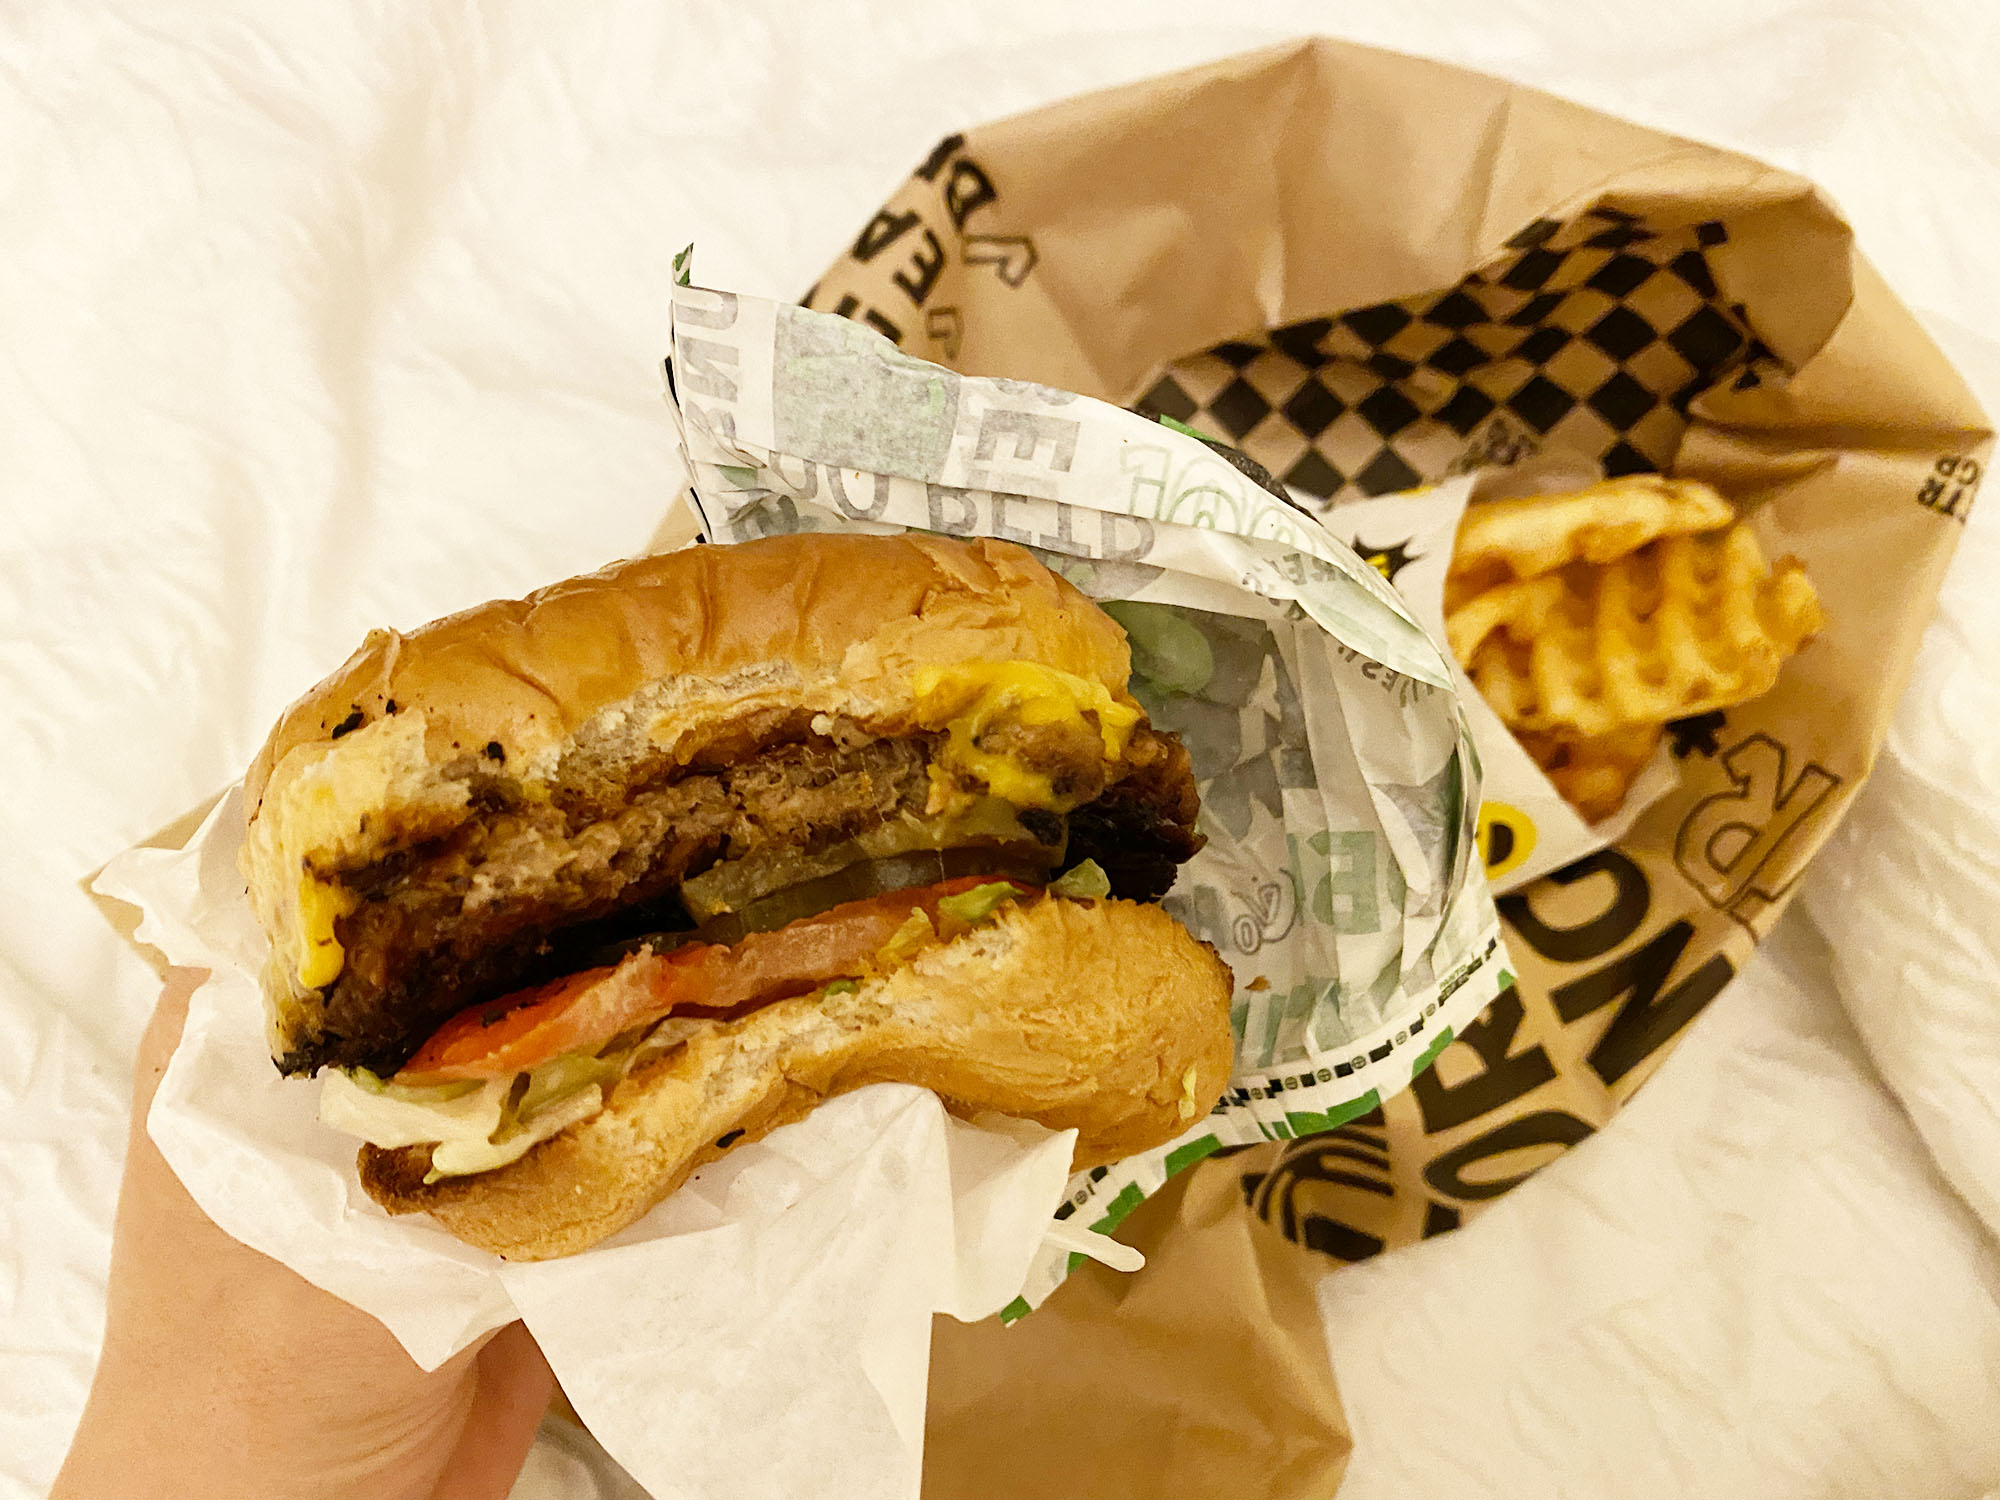 NYC: Jerrell's Betr Brgr - A late-night vegan burger joint